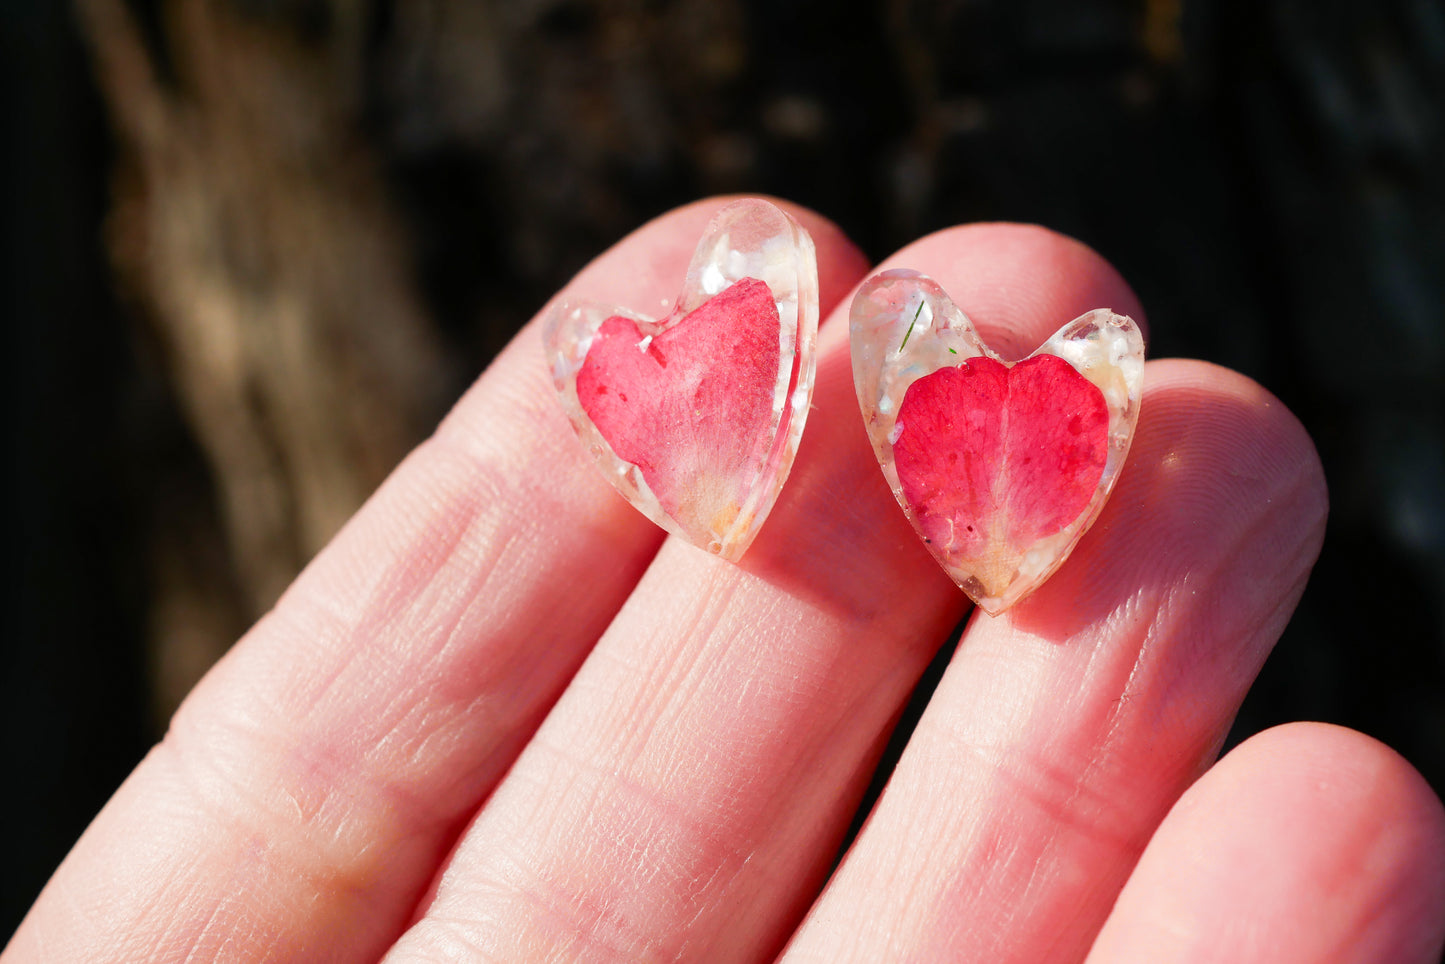 Rose petal and crushed mother of pearl heart stud earrings